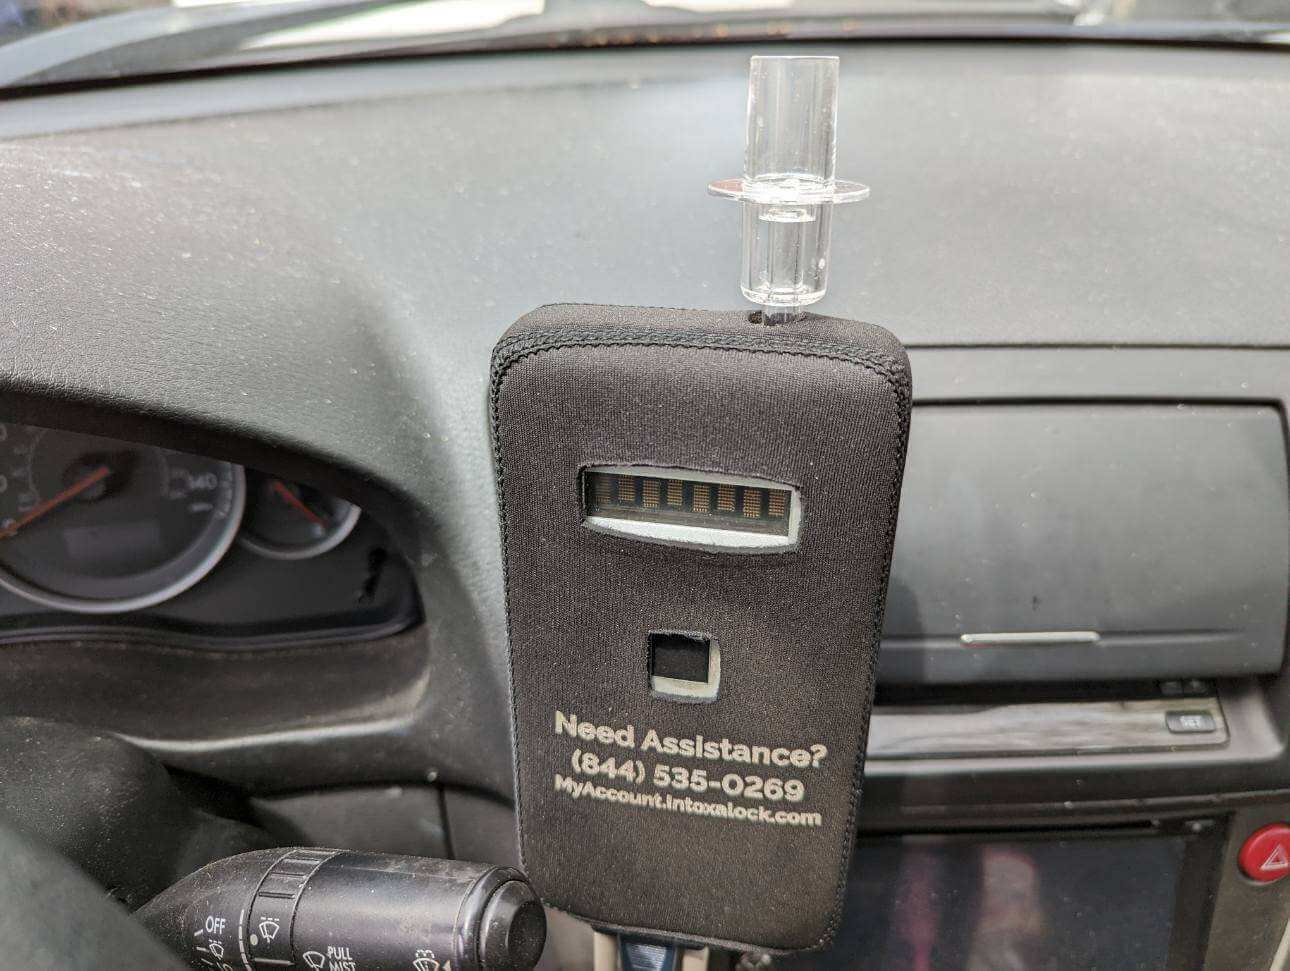 Ignition interlock installed on a vehicle